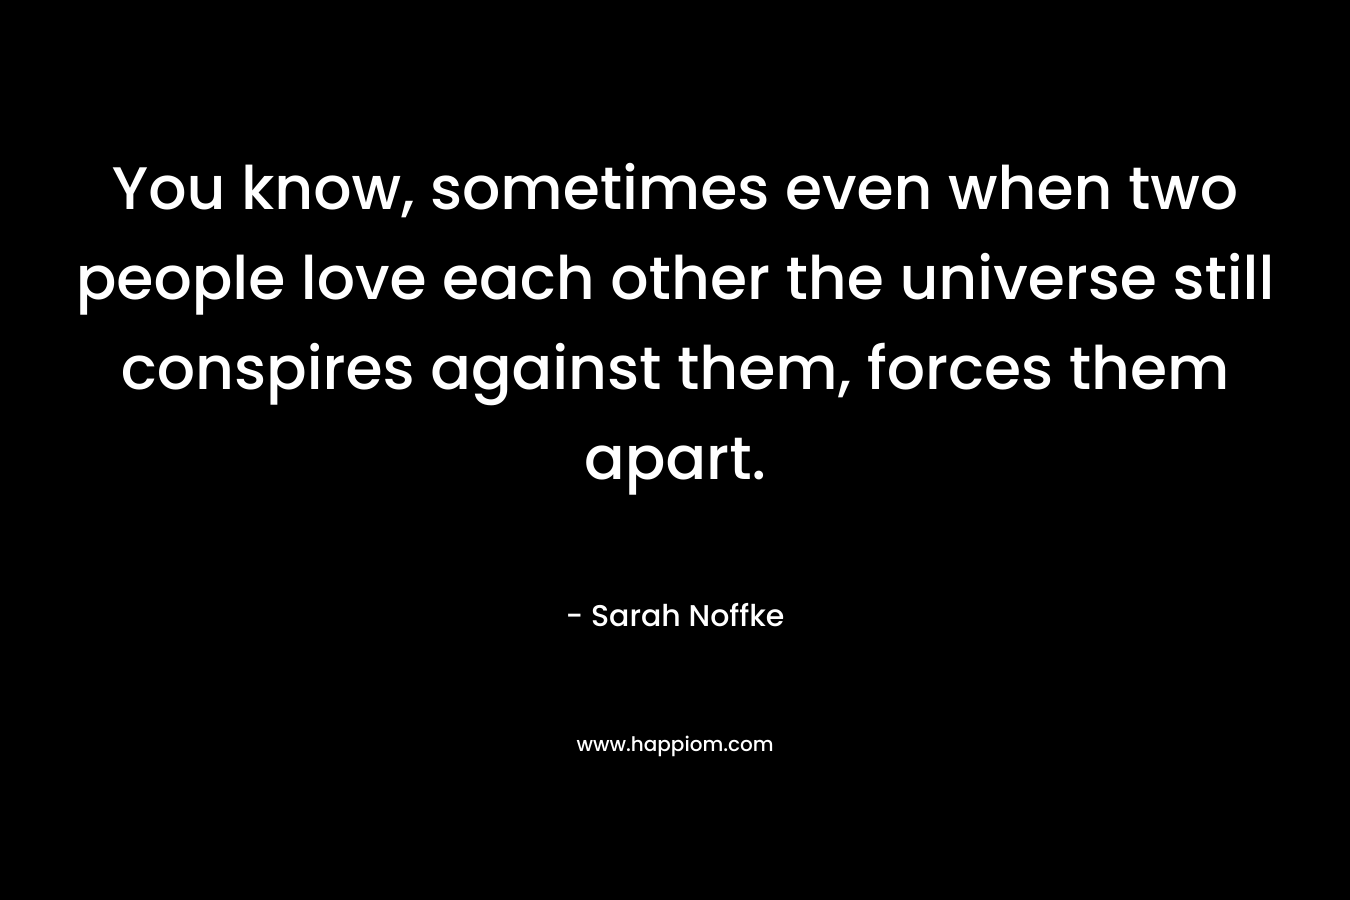 You know, sometimes even when two people love each other the universe still conspires against them, forces them apart. – Sarah Noffke